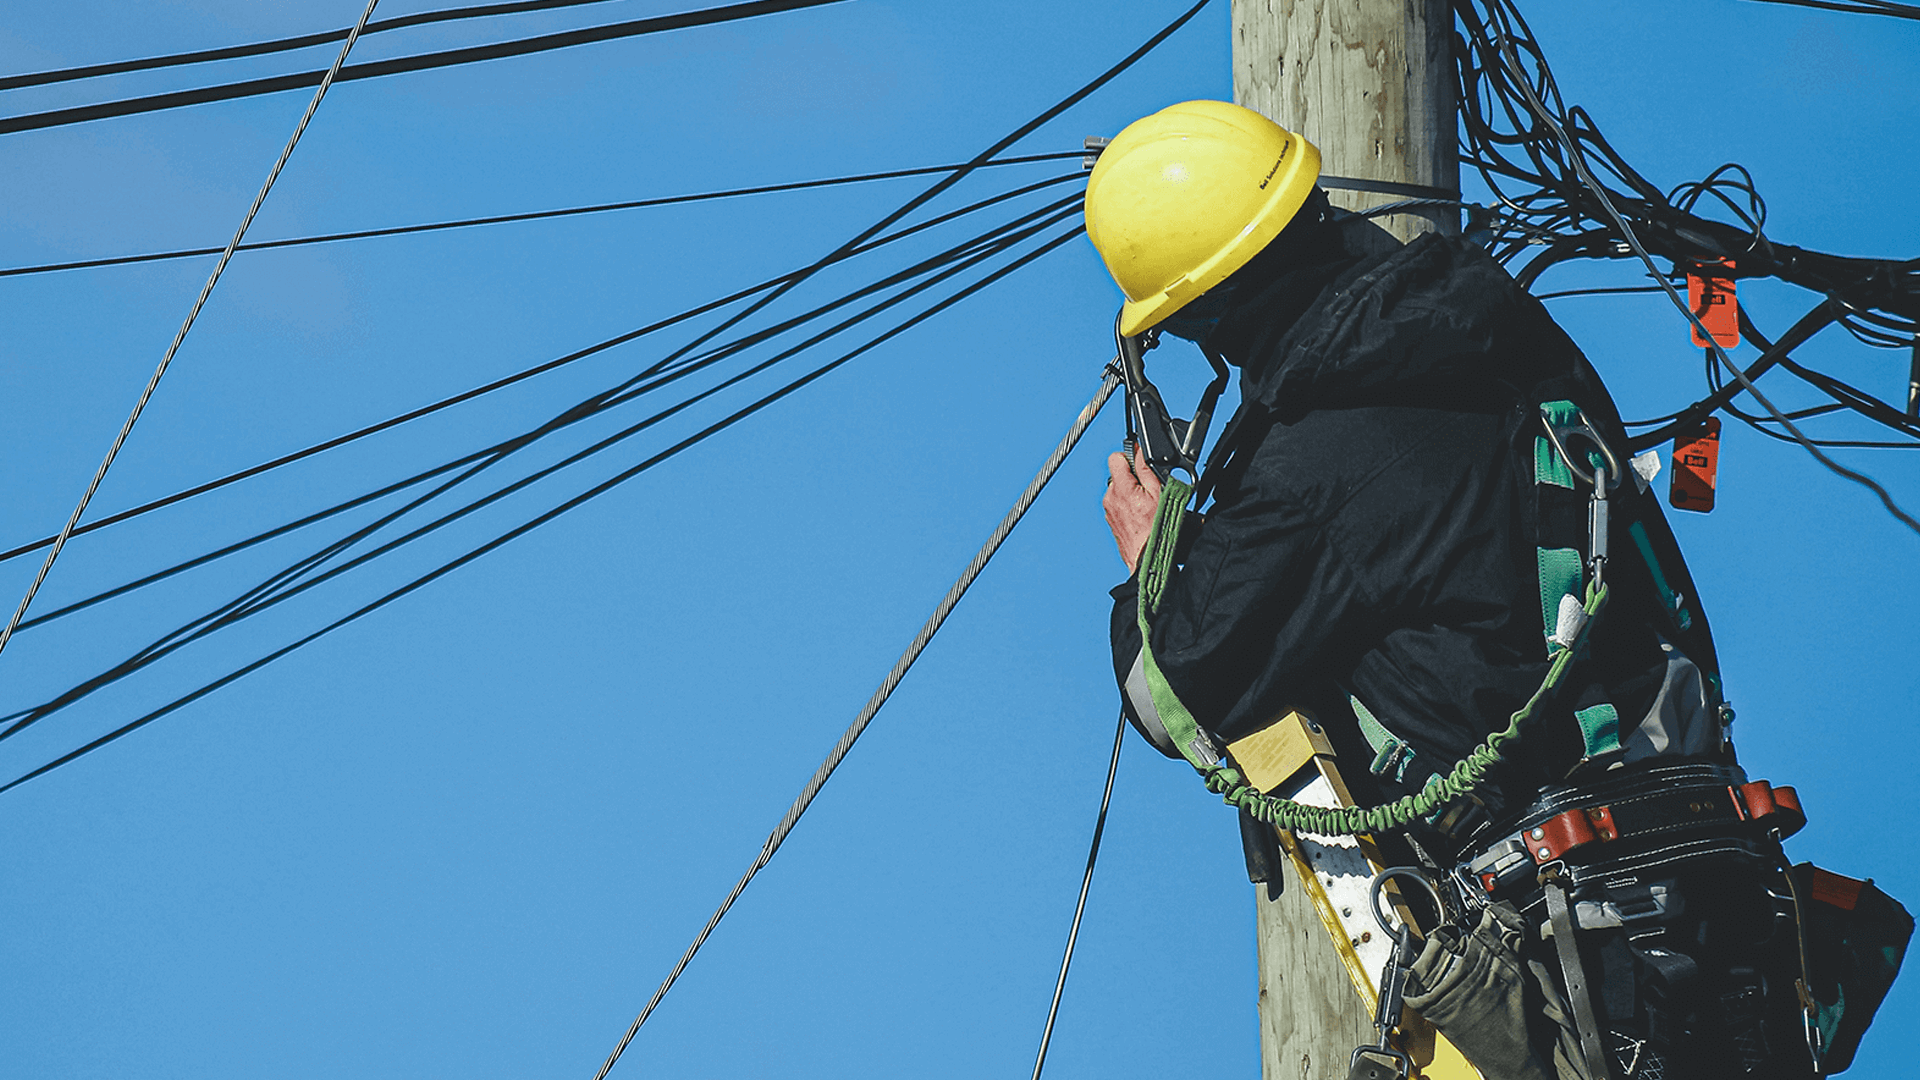 lineman wearing yellow hat working on power lines